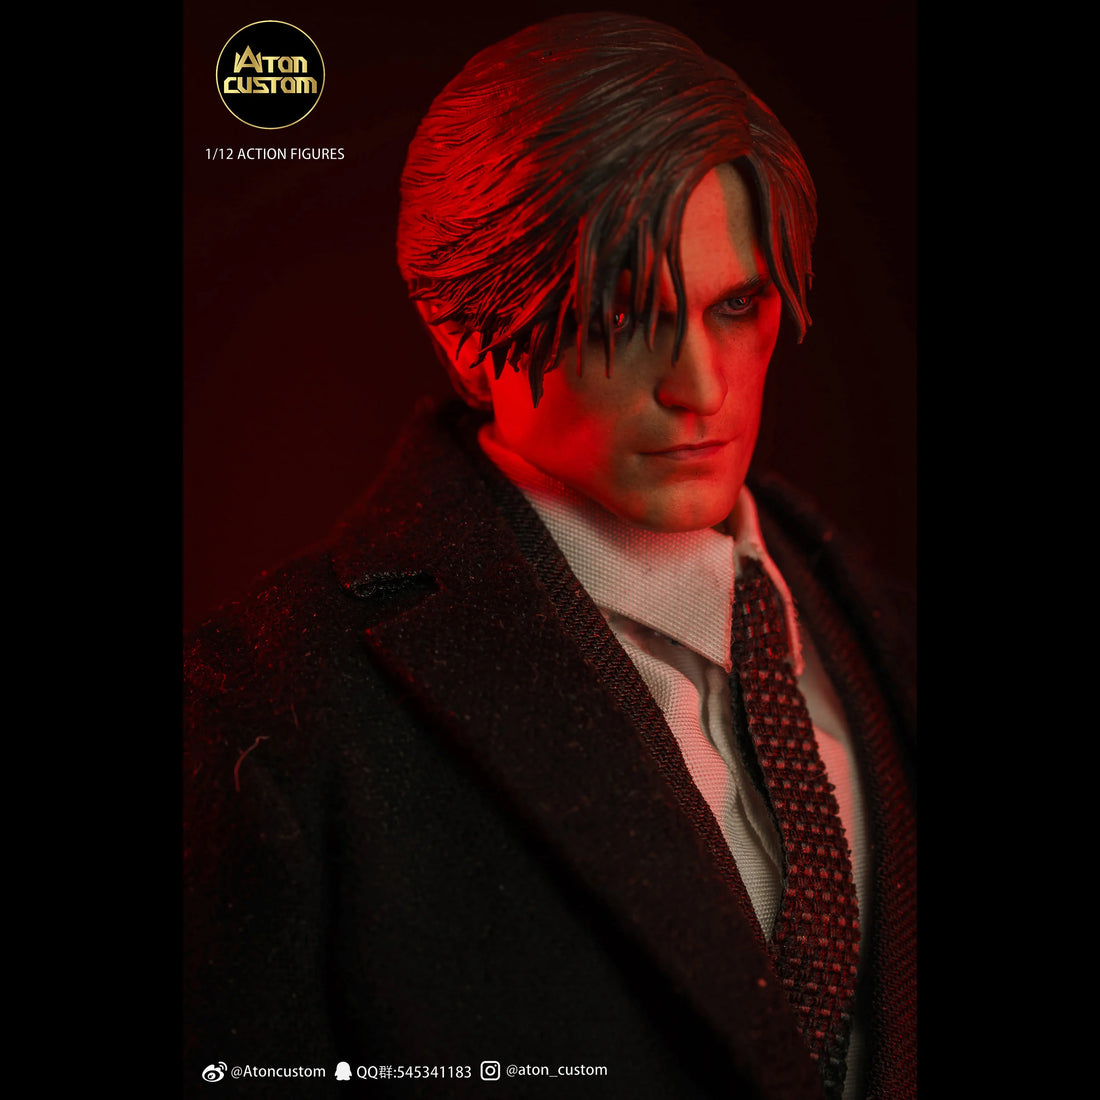 In Stock Aton Custom The Batman Robert Pattinson Bruce Wayne 1/12 6in 15CM Action Figures Toy Gift Collection Hobby